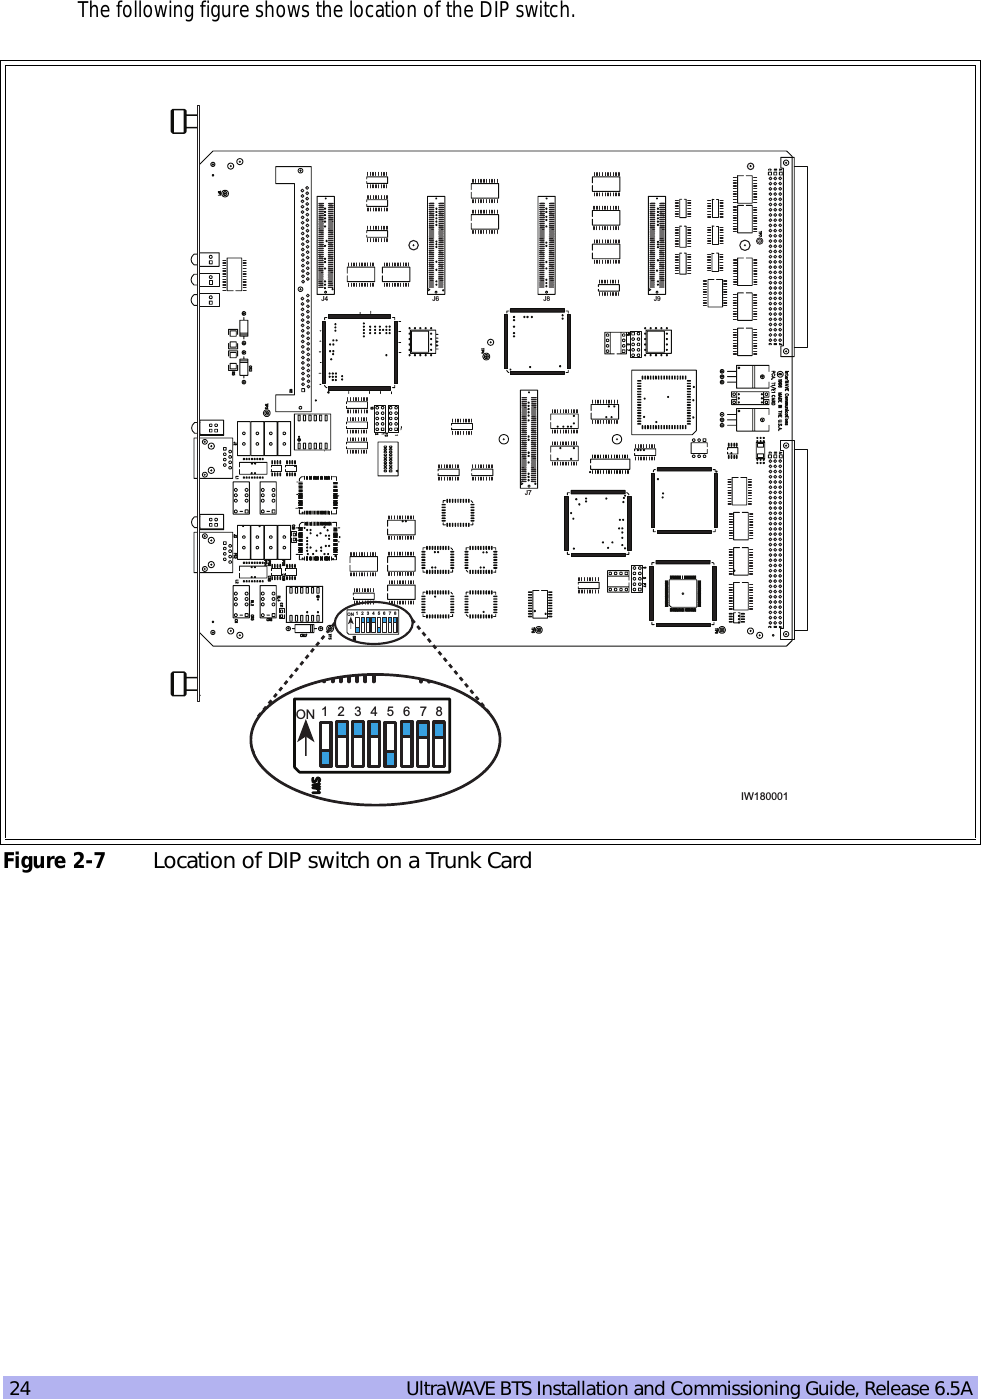 24   UltraWAVE BTS Installation and Commissioning Guide, Release 6.5AThe following figure shows the location of the DIP switch.Figure 2-7 Location of DIP switch on a Trunk CardJ6 J8J7ON 12 435678J4 J9ON 12 435678IW180001